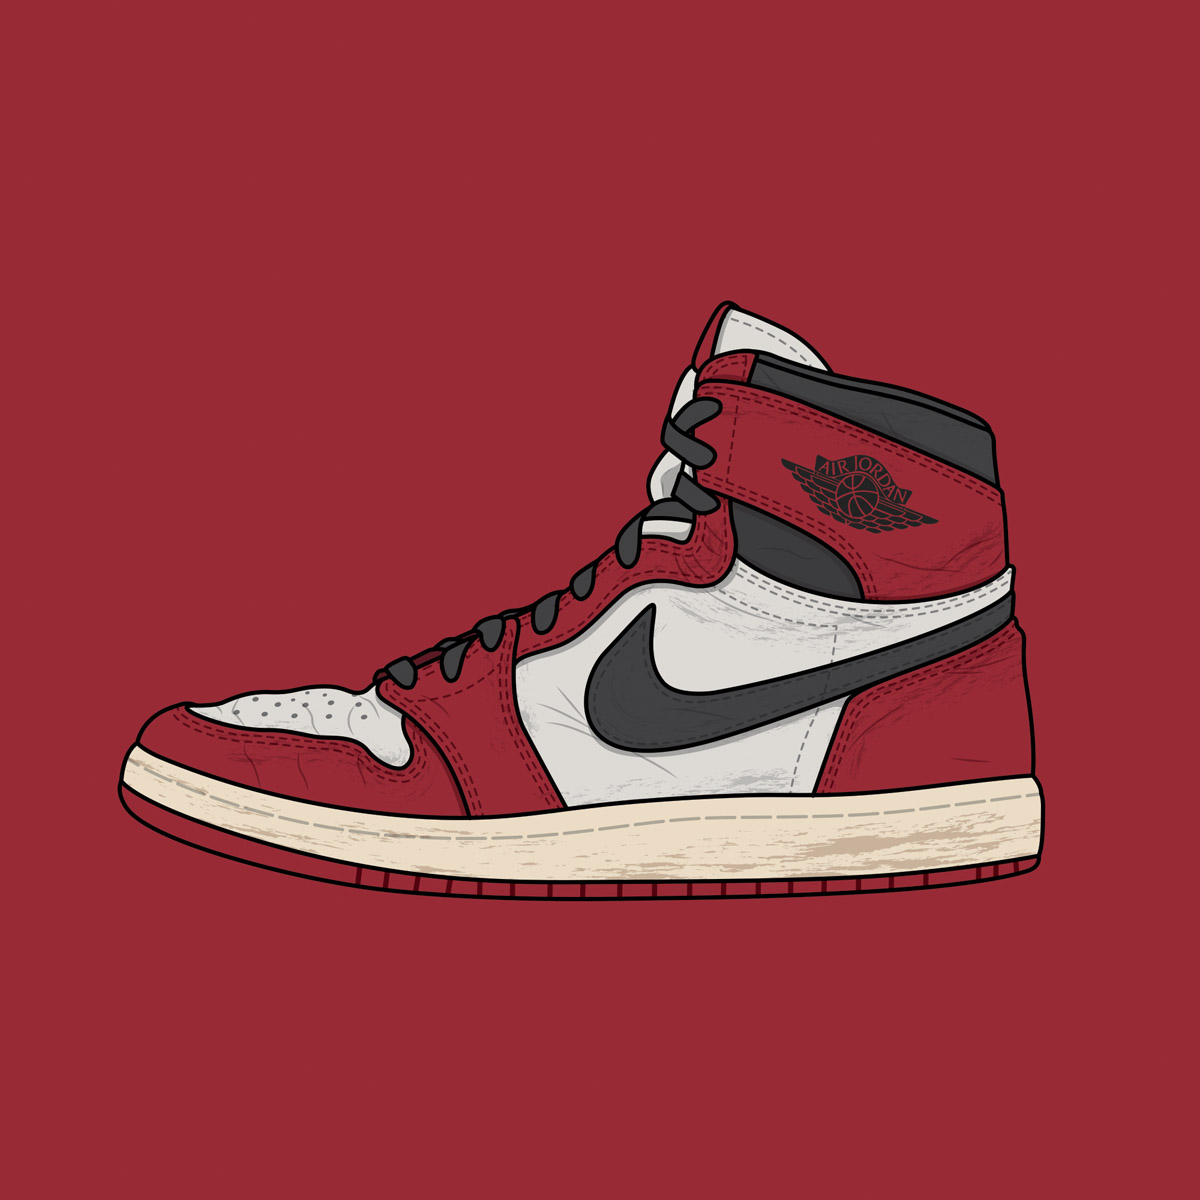 best place to resell jordans